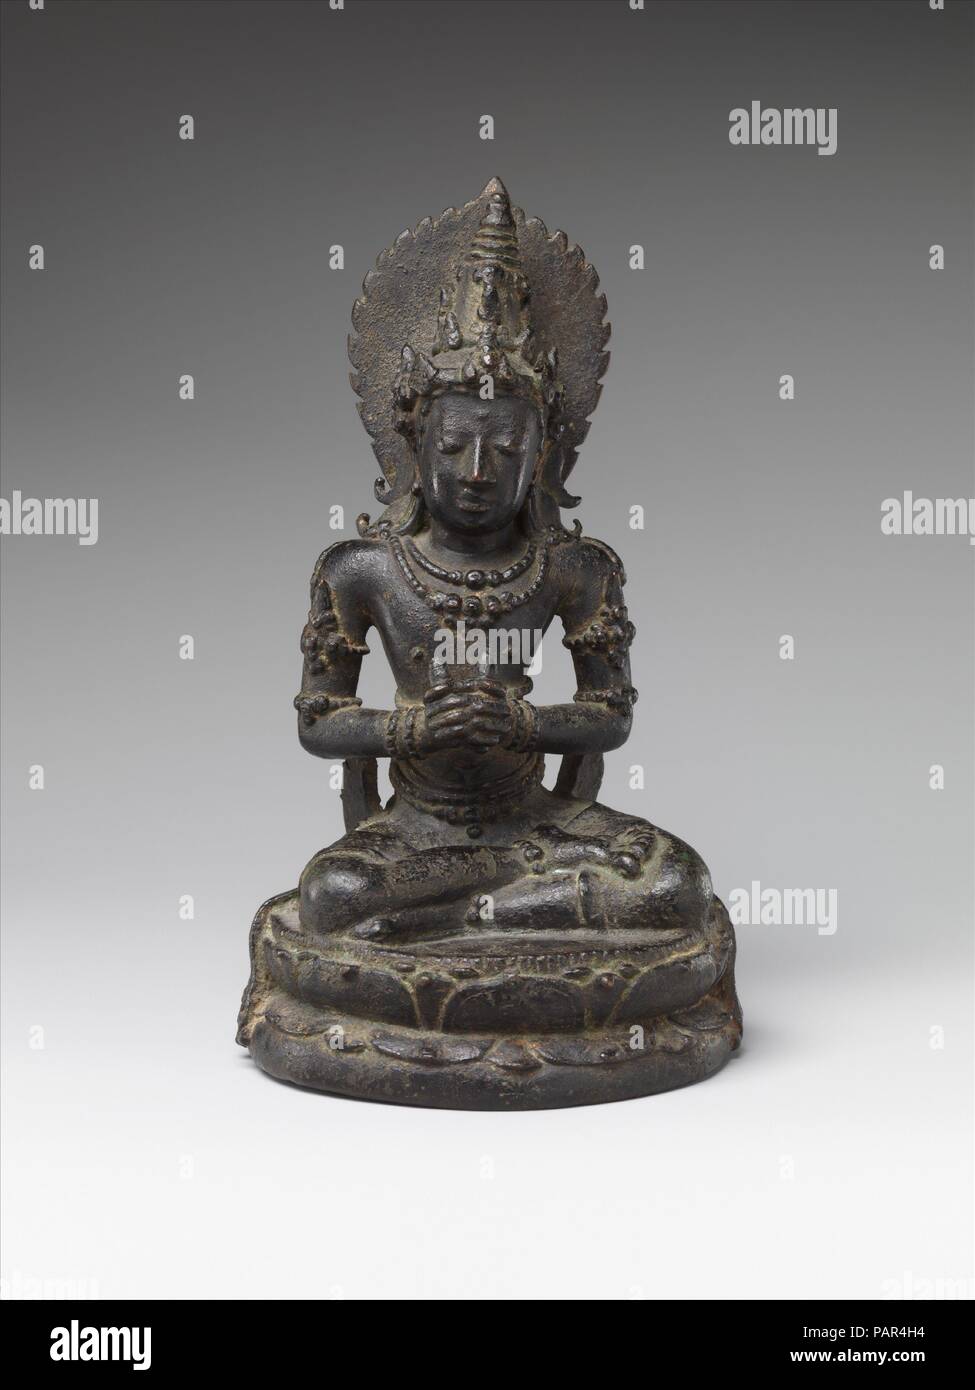 Seated Esoteric Buddhist Deity. Culture: Indonesia (Java). Dimensions: H. 6 3/5 in. (16.8 cm). Date: ca. second half of the 11th-century. Museum: Metropolitan Museum of Art, New York, USA. Stock Photo